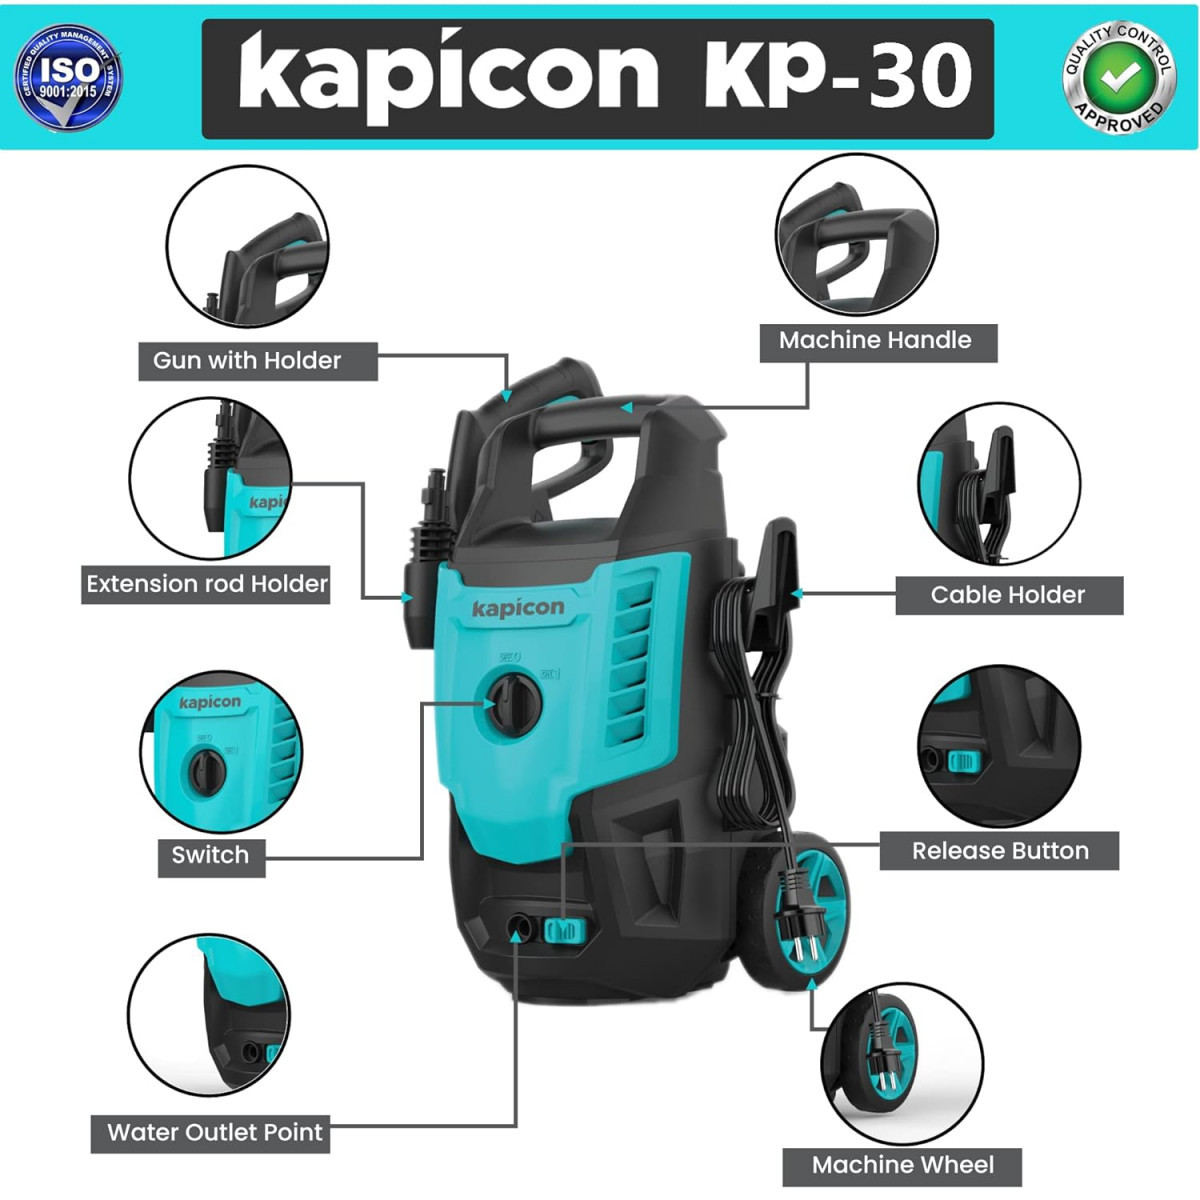 Kapicon KP-30 Portable High Pressure Car Washer Machine Motive Power 1800 Watts with max Pressure 135-160 Bars 55 LMin Flow Rate Portable for Car Bike and Home Cleaning Purpose Updated Model